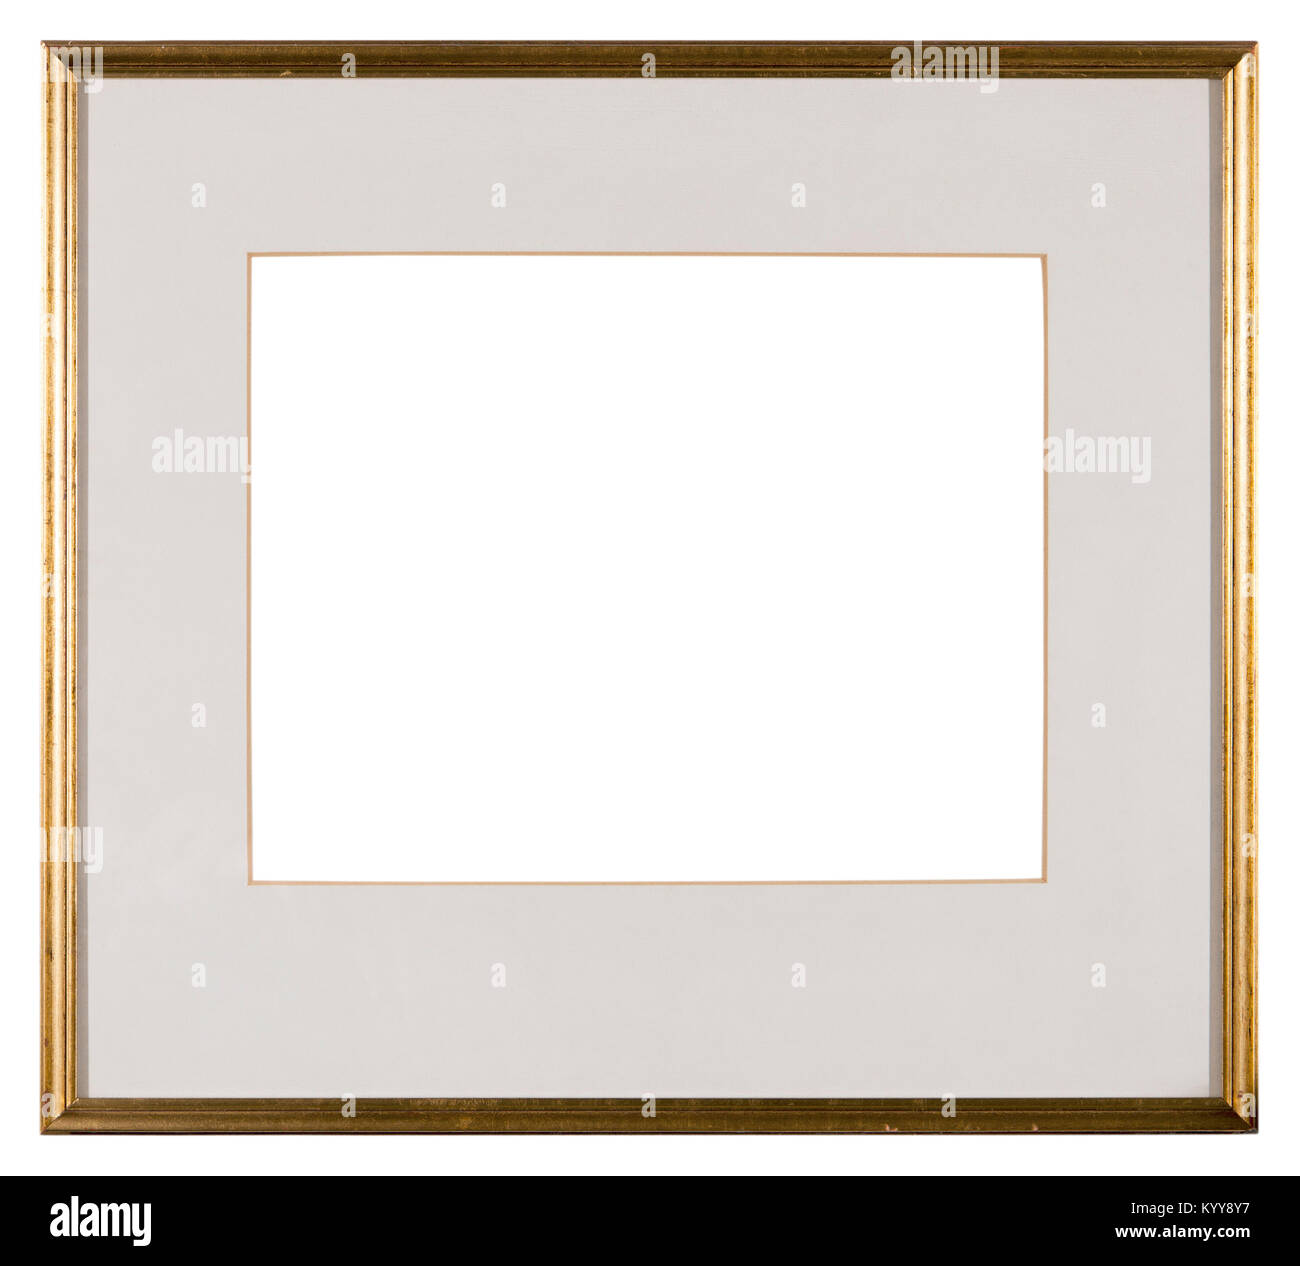 Empty picture frame isolated on white, landscape format with mount, distressed gilt finish Stock Photo